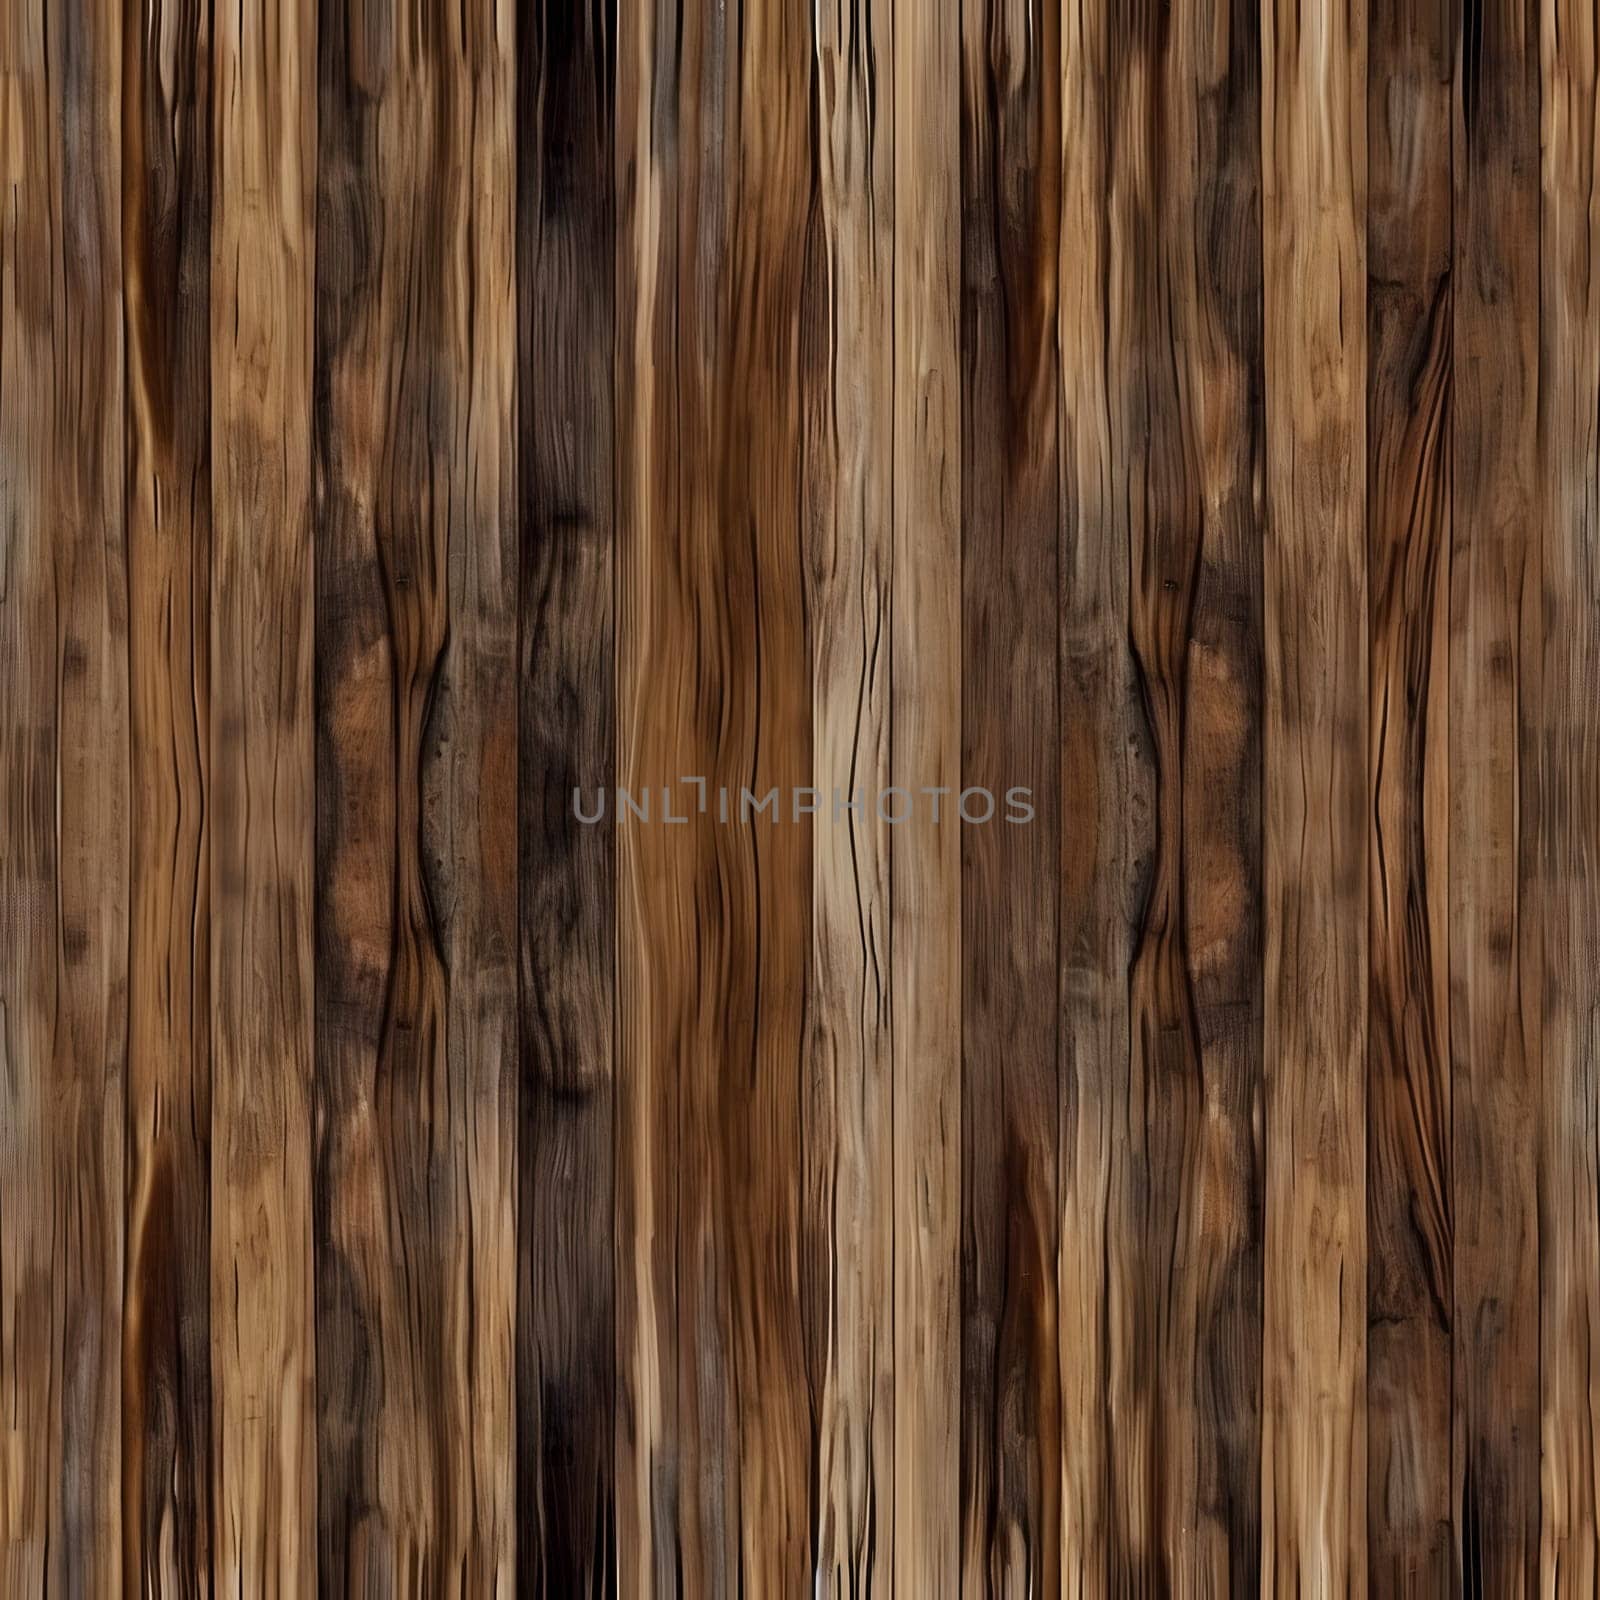 Medium brown wood background. Seamless wooden planks board texture. by z1b